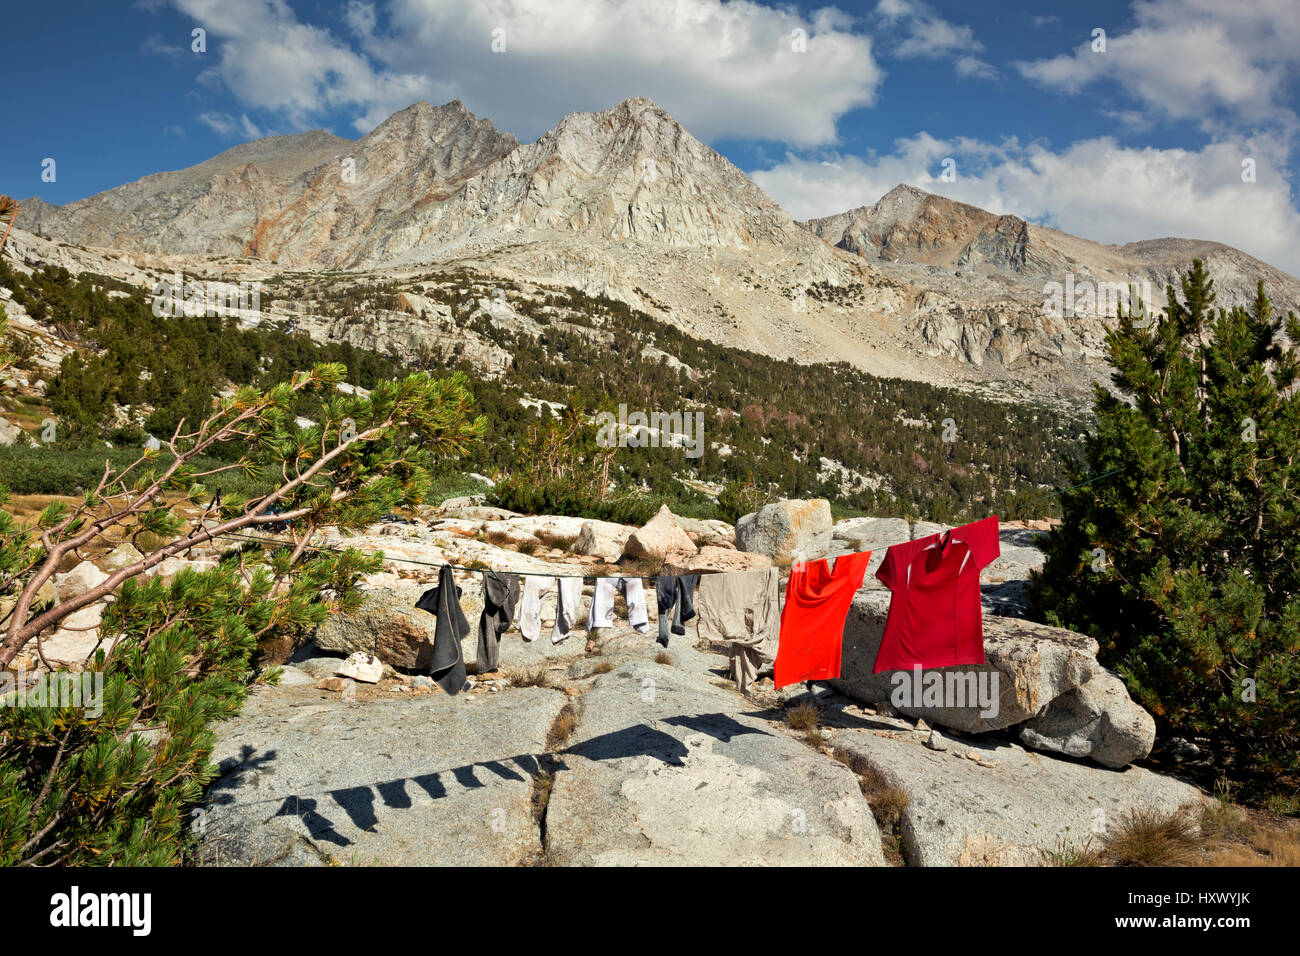 CA03131-00...CALIFORNIA - Clothes quickly drying in the High Sierra sunshine of the Palisade Lakes area in Kings Canyon National Park. Stock Photo